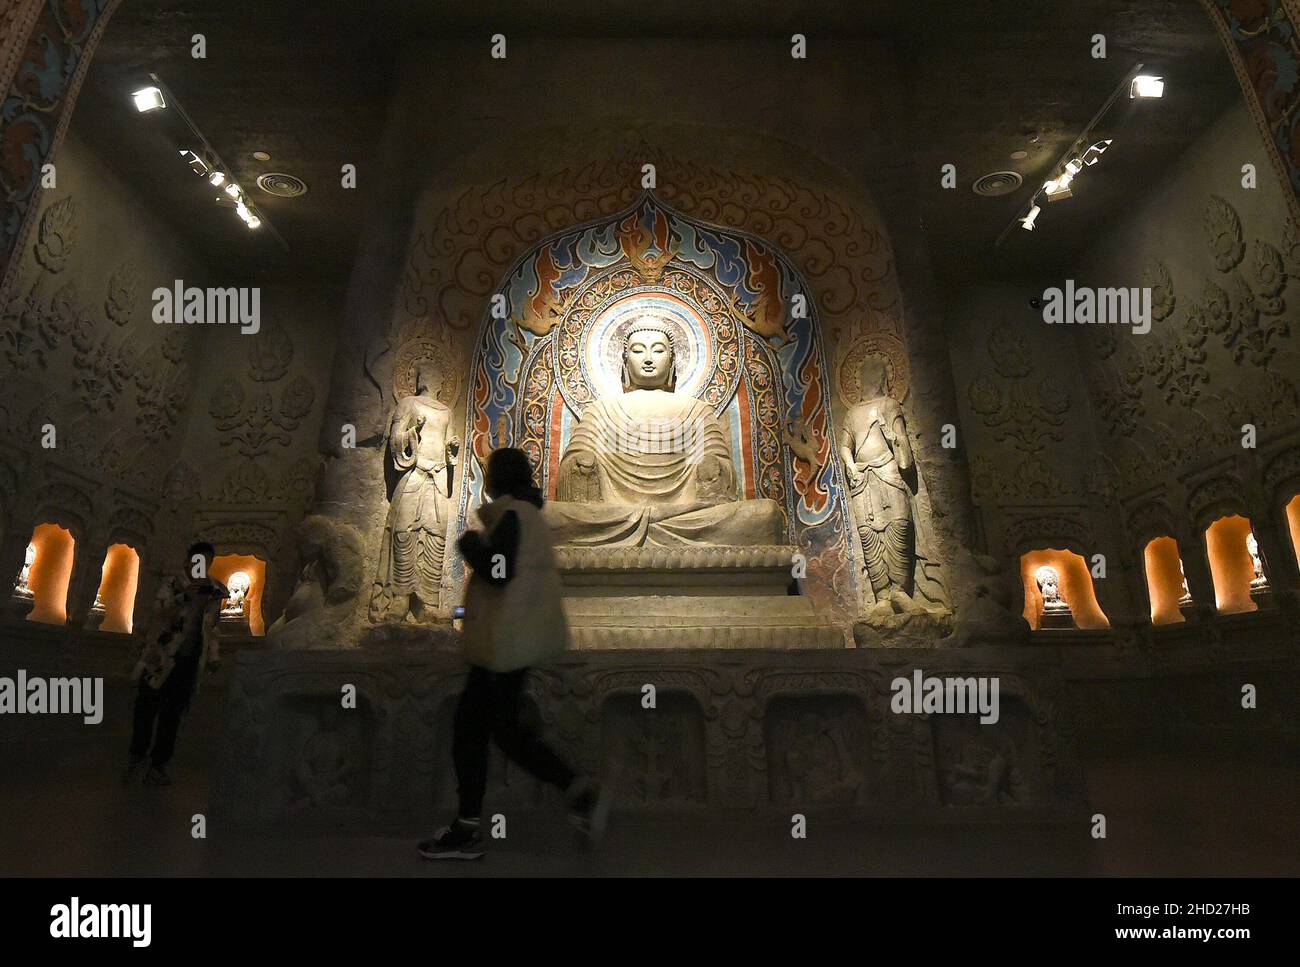 Handan, China's Hebei Province. 2nd Jan, 2022. People visit Handan Museum during the New Year holiday in Handan, north China's Hebei Province, Jan. 2, 2022. Credit: Hao Qunying/Xinhua/Alamy Live News Stock Photo